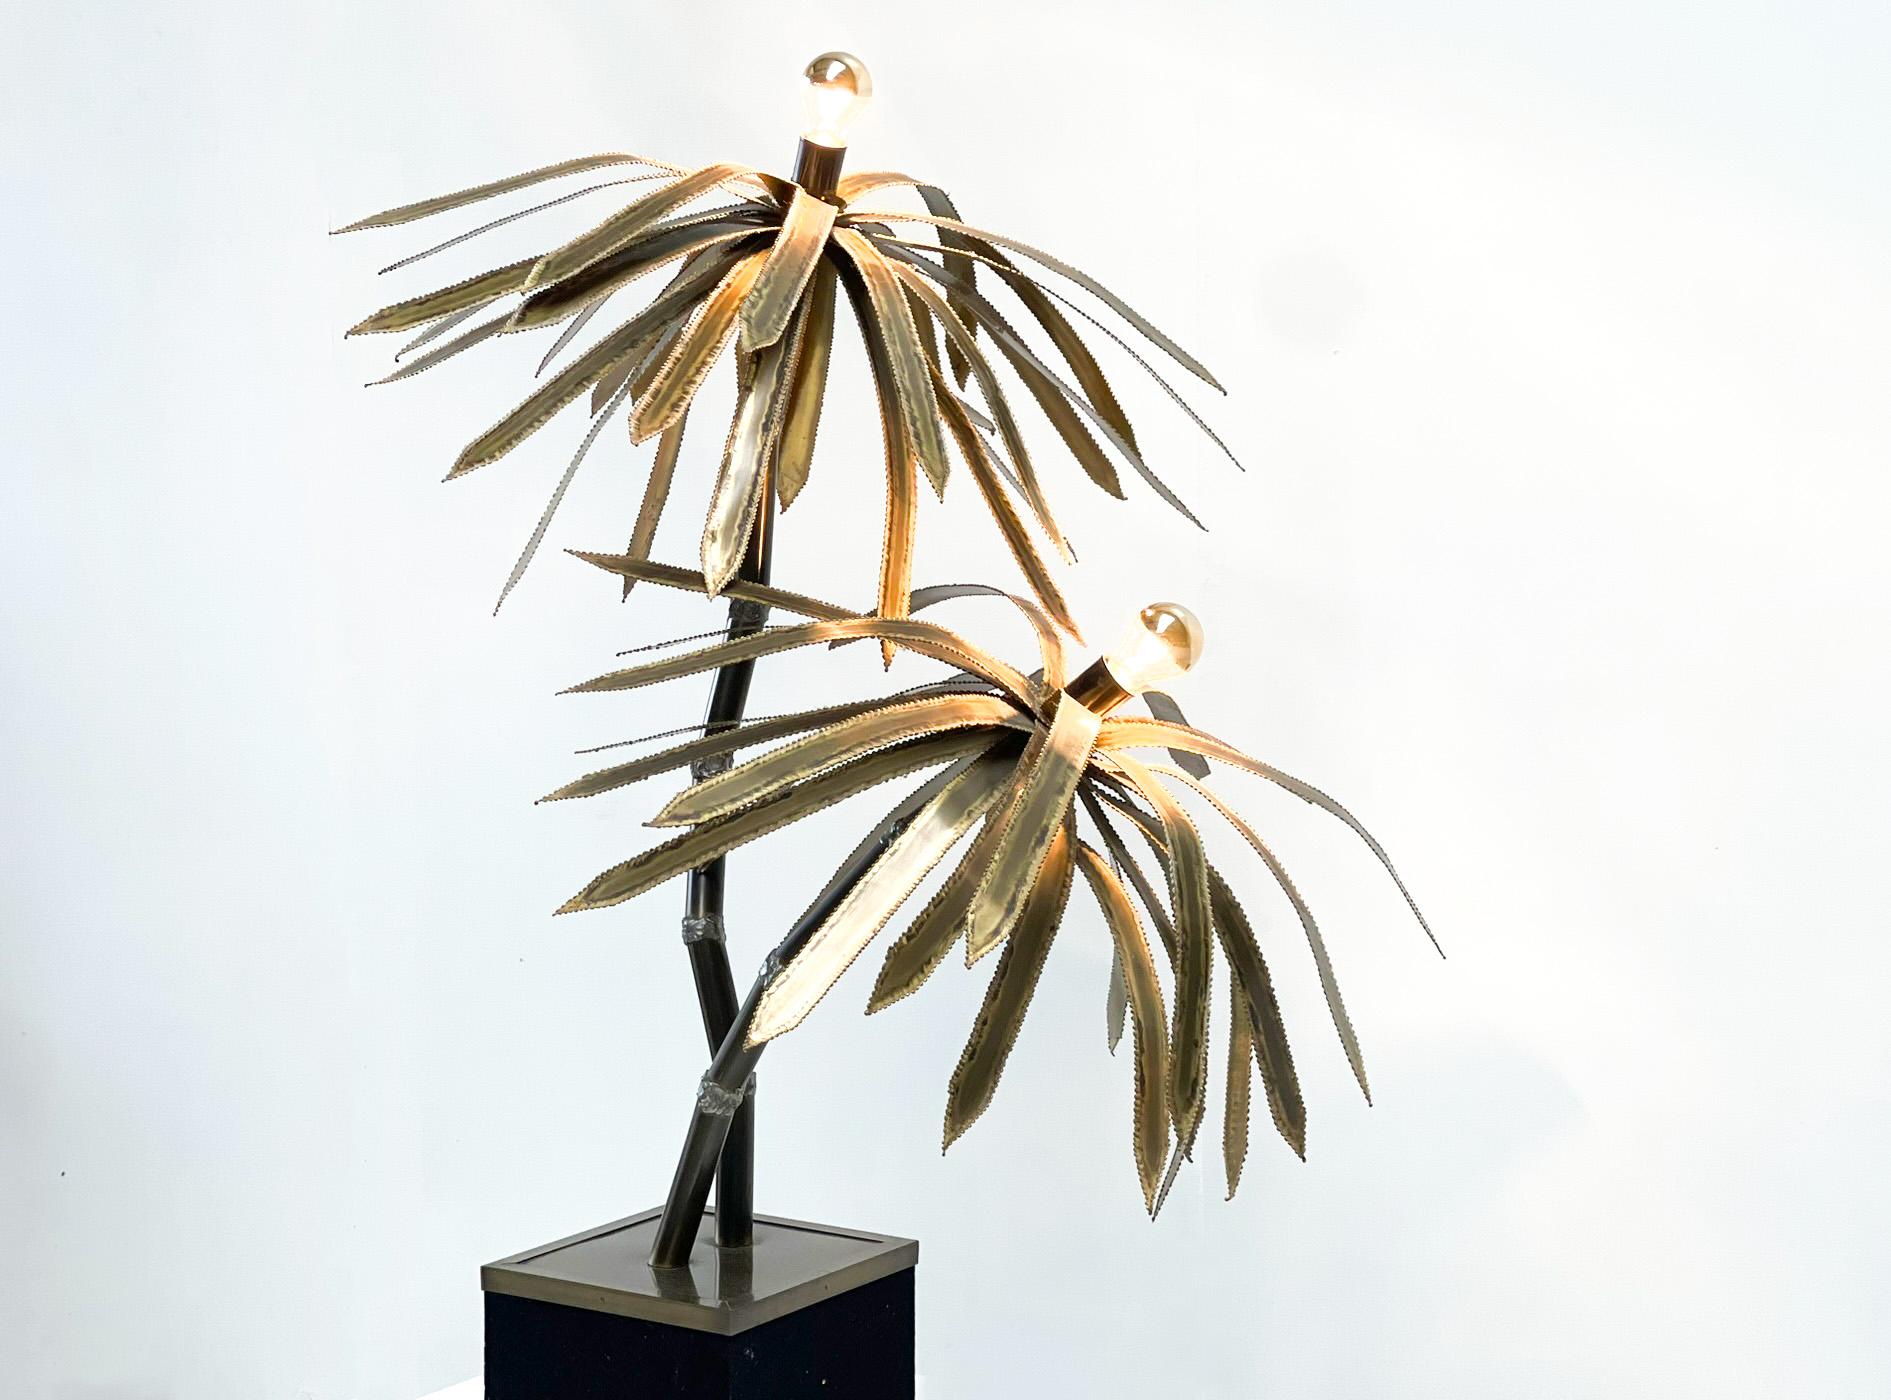 Maison Jansen floorlamp
Beautiful floor lamp by 1 of most famous lamp manufacterer of France, Maison Jansen.

Maison Jansen is known for their luxurious furniture and lamps This is a famous palm lamp from the 70s. The lamp is in very good